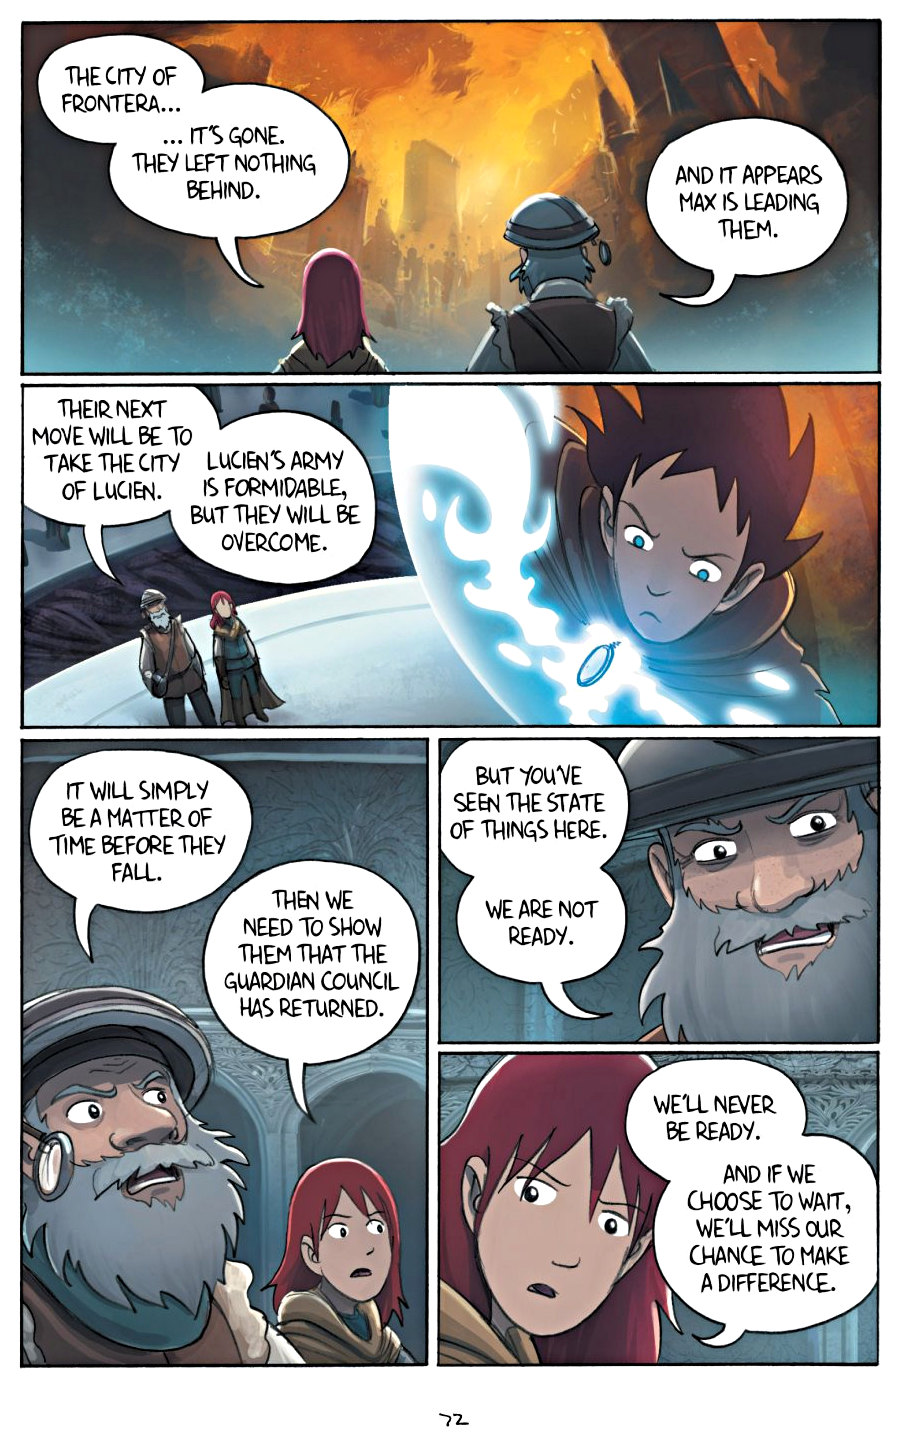 page 72 of amulet 5 prince of the elves graphic novel